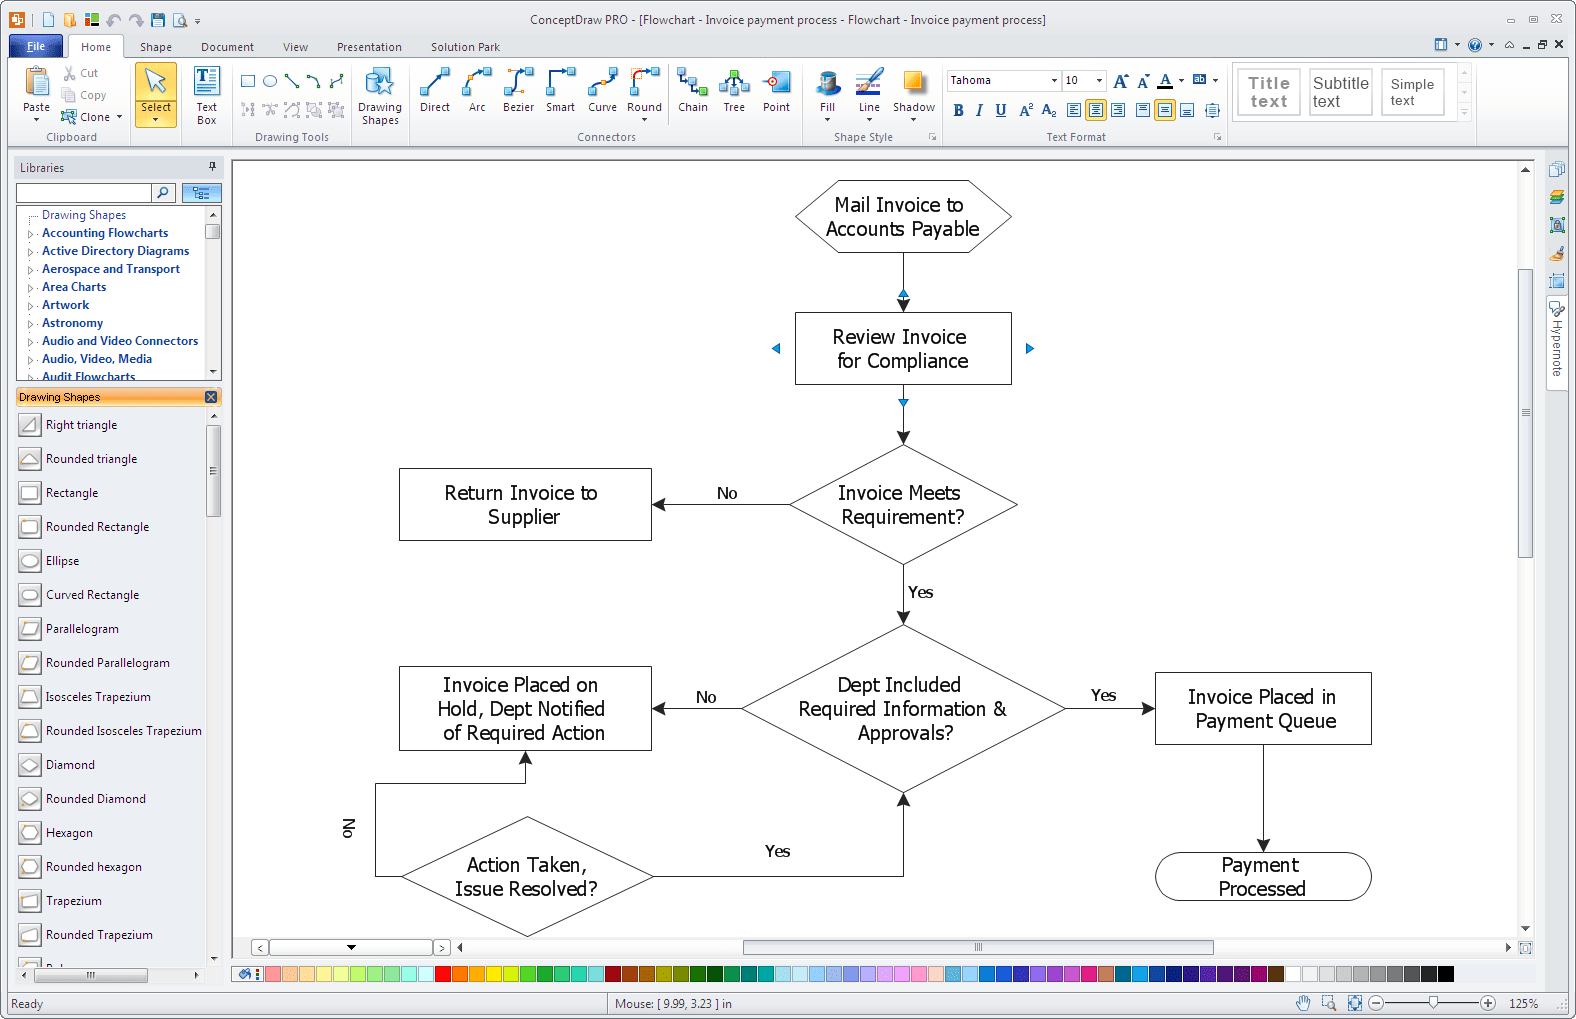 Concept Draw Office 10.0.0.0 + MINDMAP 15.0.0.275 downloading